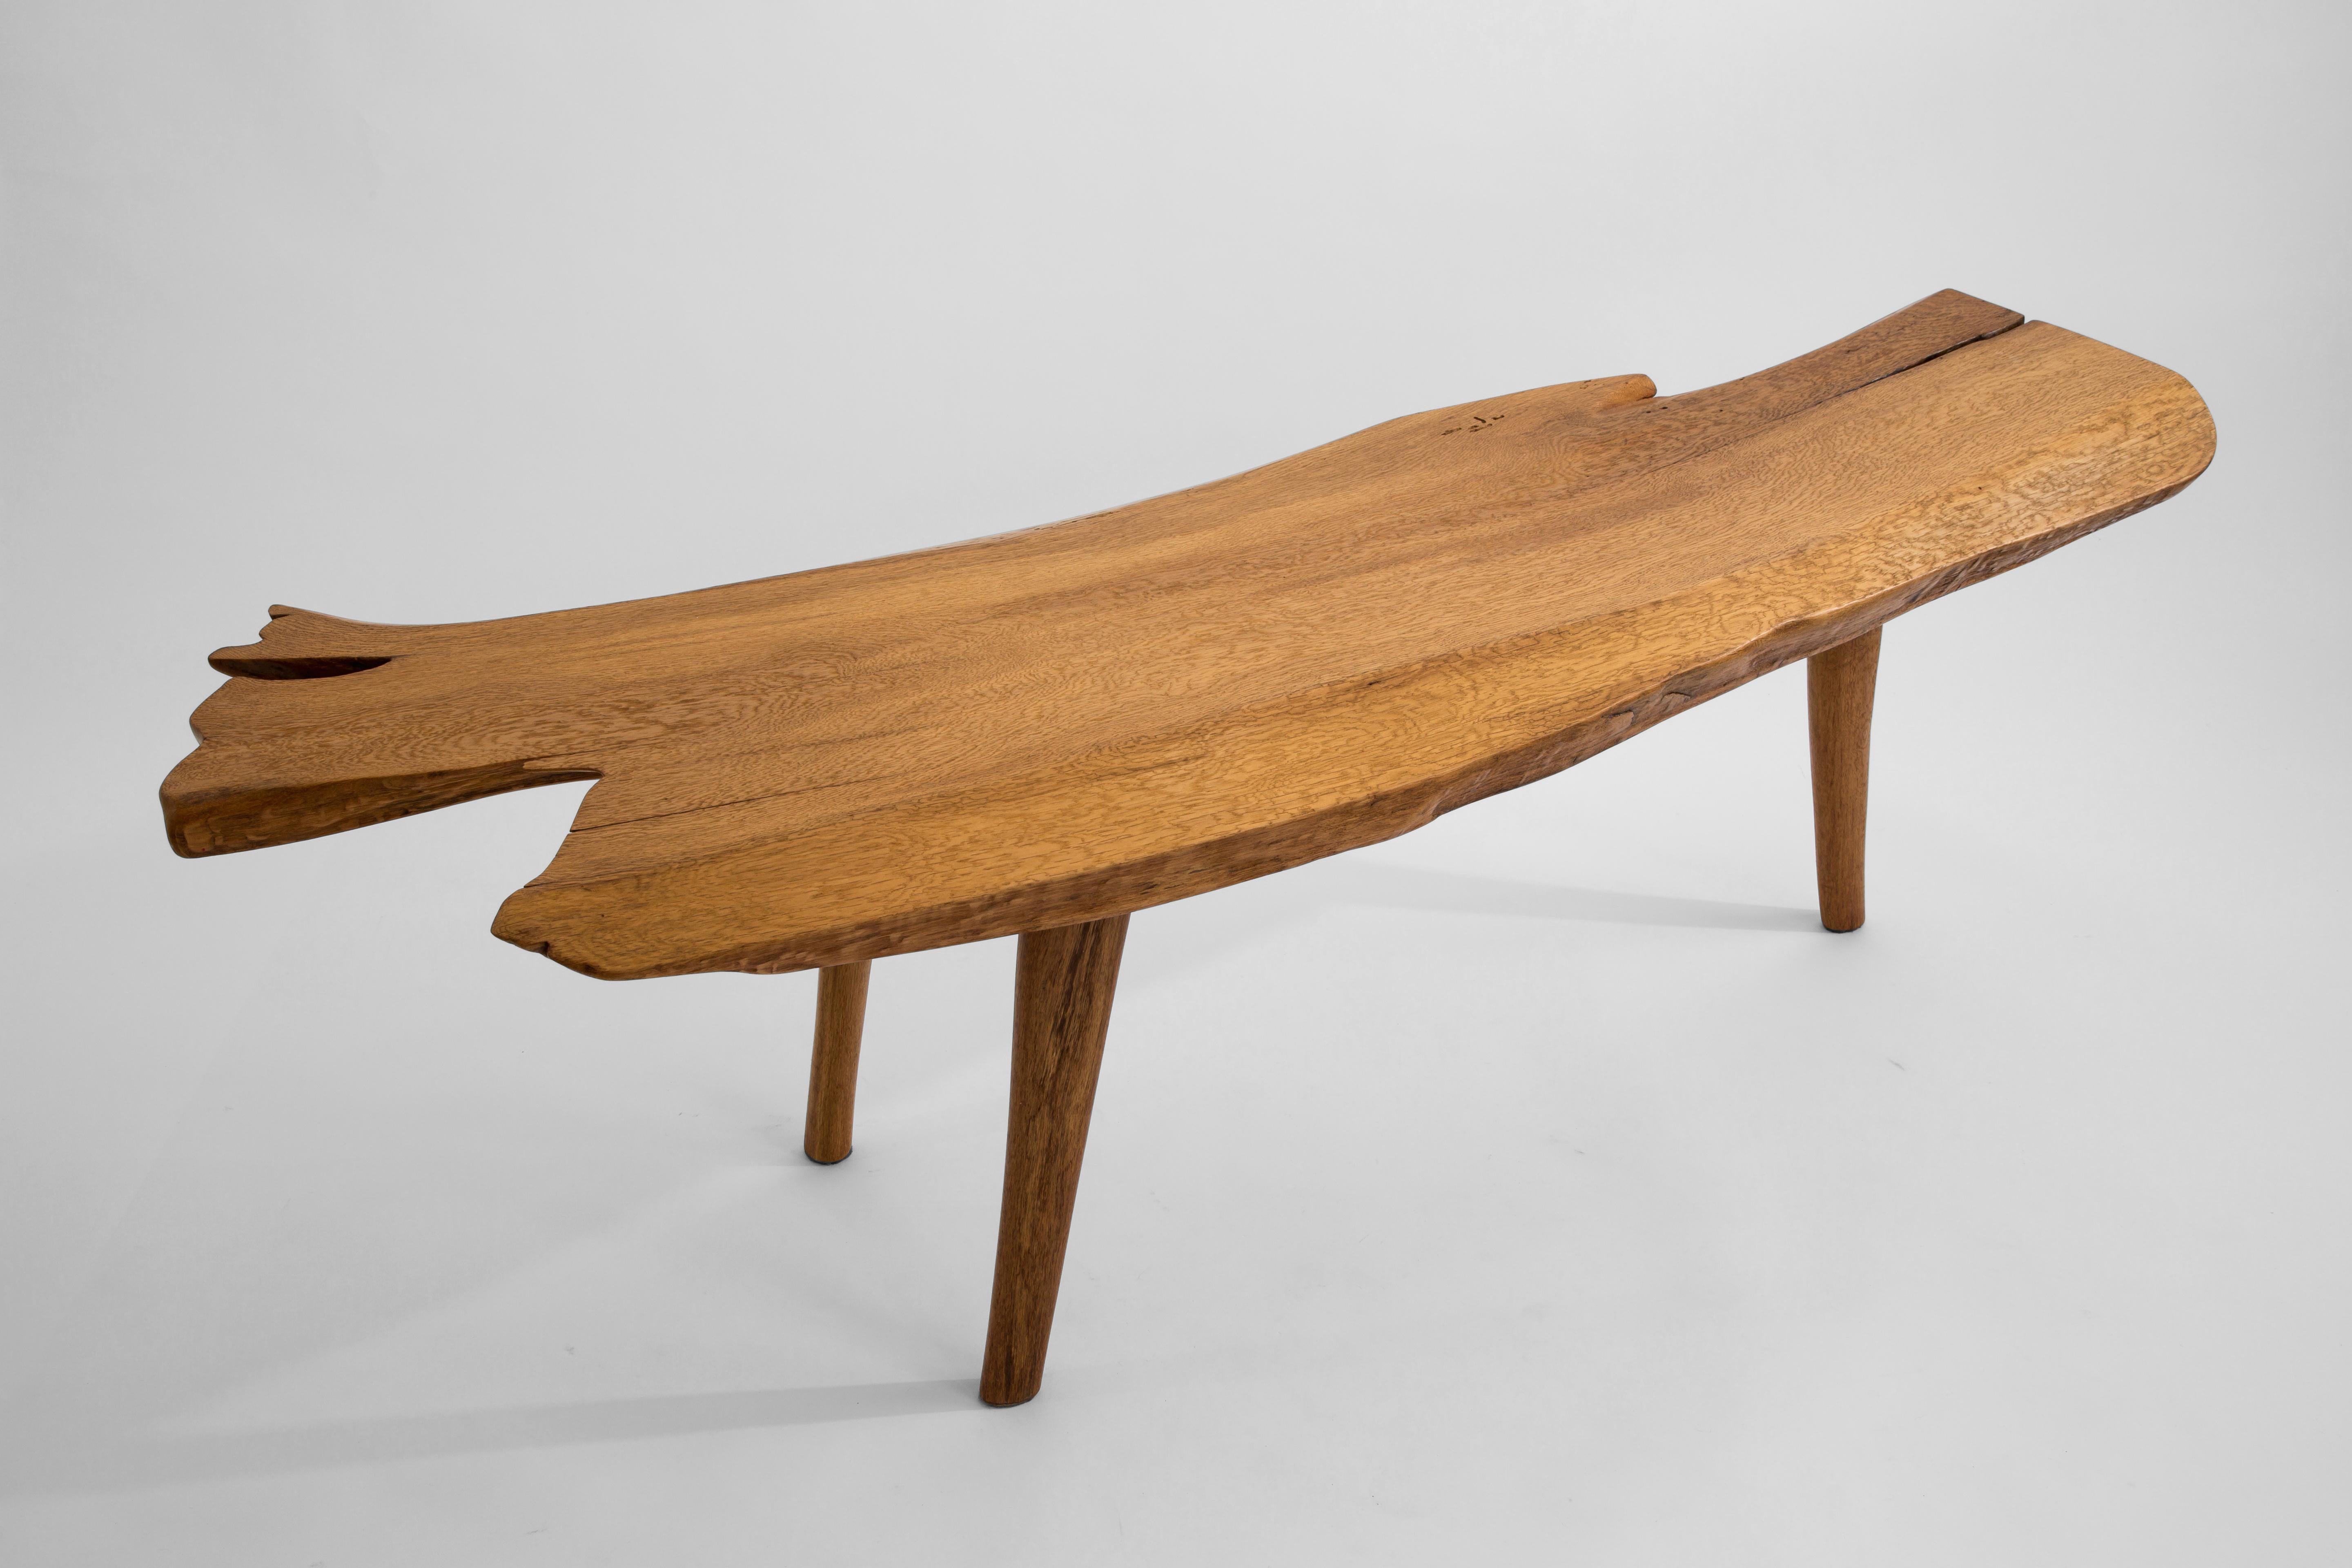 Unique smoked oak bench sculpted by Jörg Pietschmann
Materials: Smoked Oak, Polished oil finish.
Dimensions: W 145.5 x D 54.5 x H 52 cm

In Pietschmann’s sculptures, trees that for centuries were part of a landscape and founded in primordial